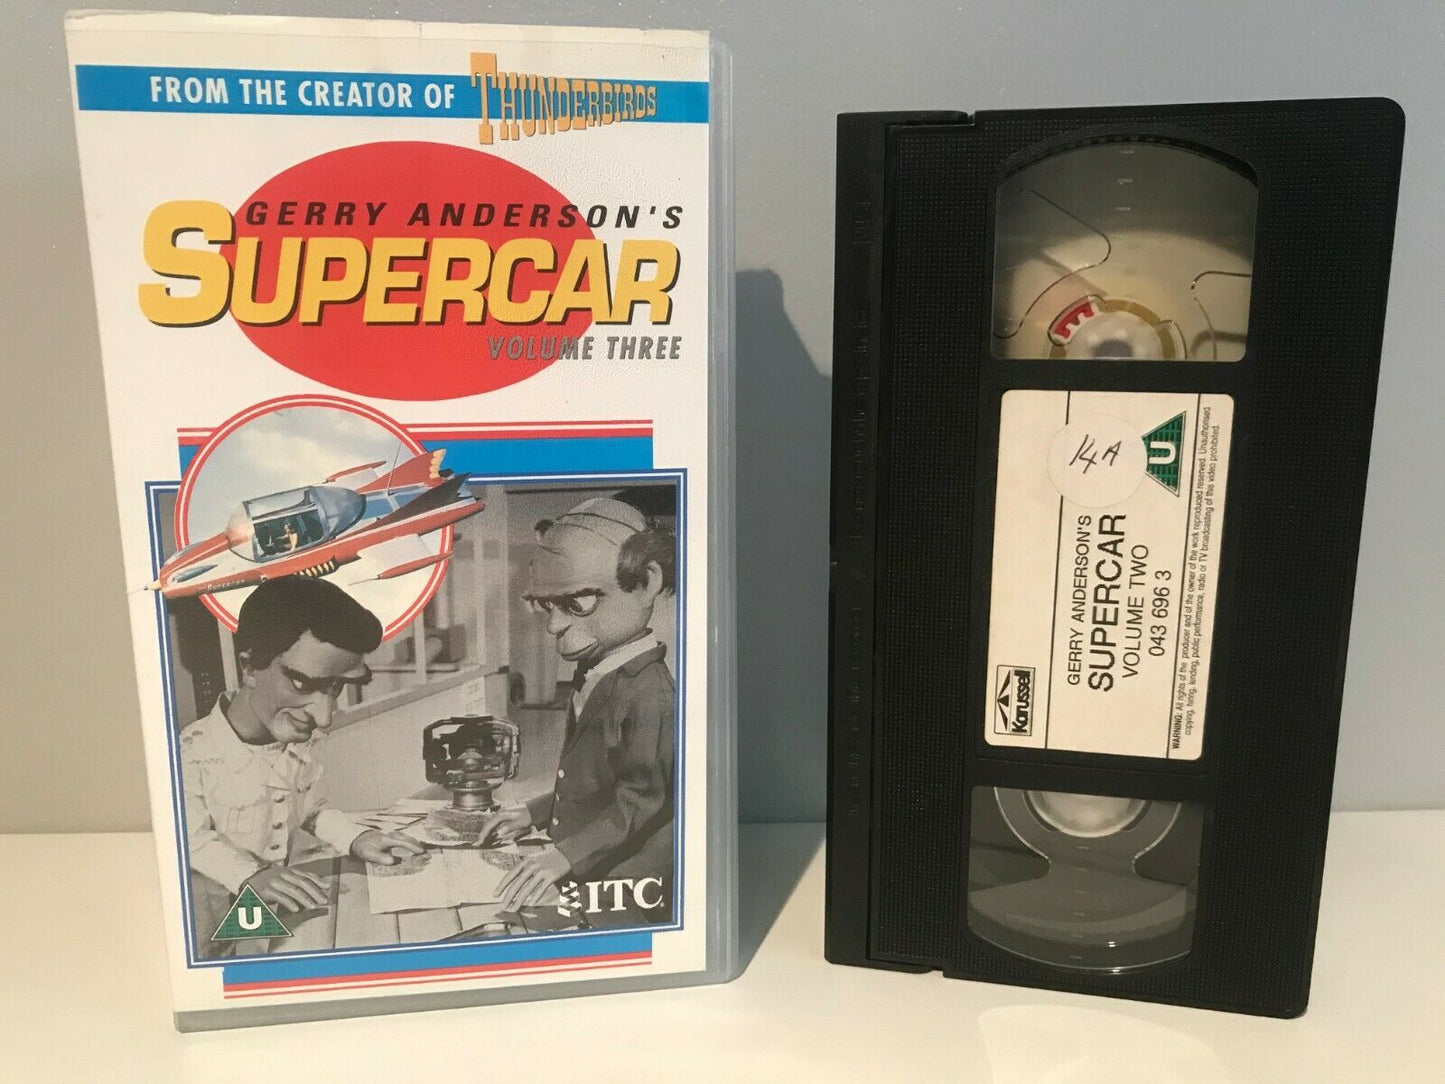 Supercar (Vol.3); [Gerry Anderson]: 'High Tension' - Adventures - Kids - VHS-